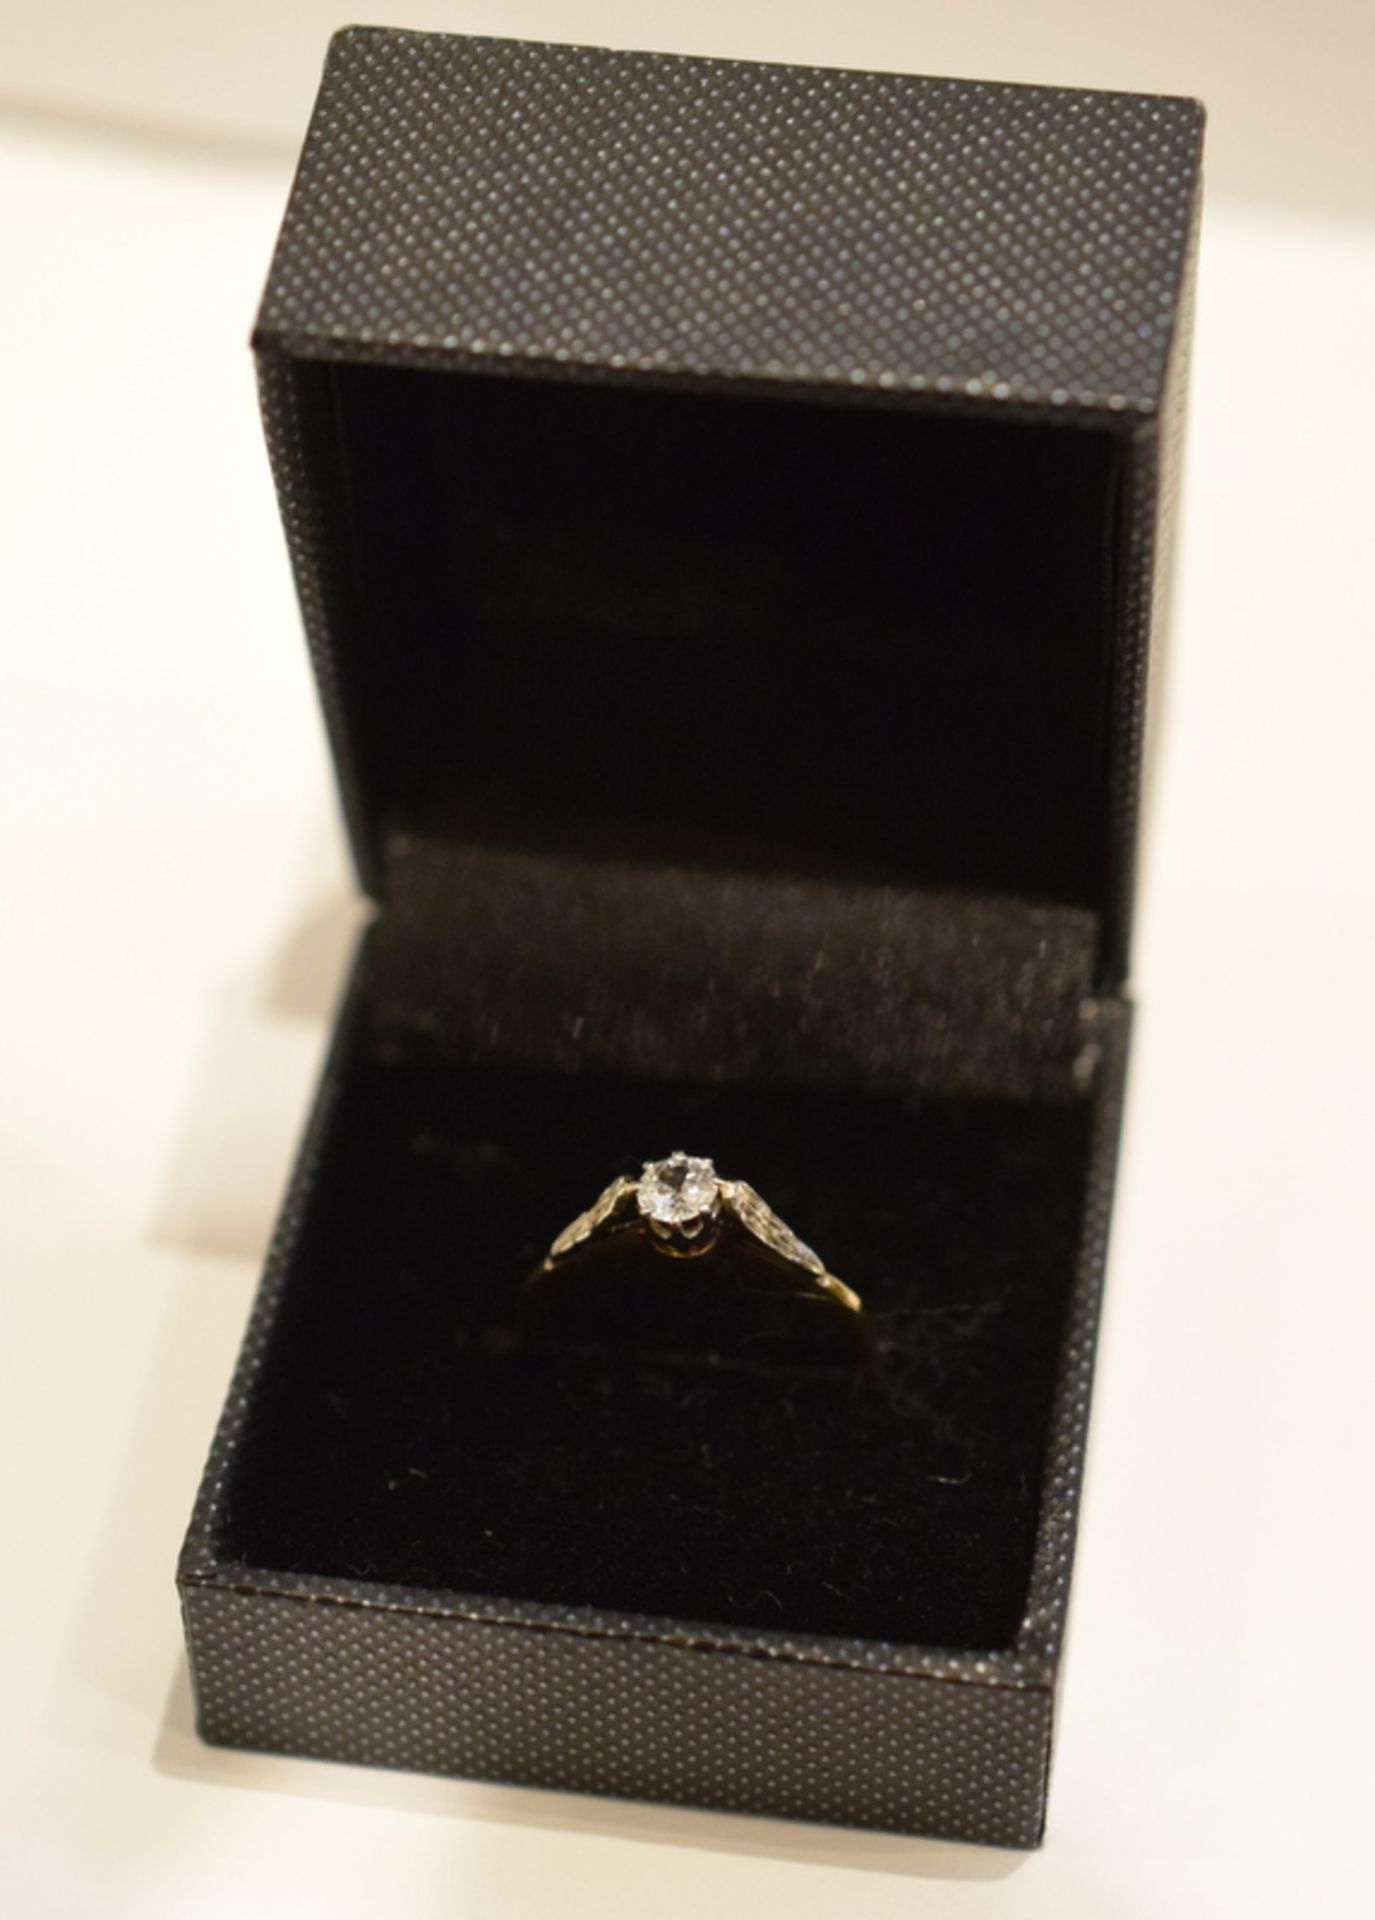 Lady's 18ct Solitaire Diamond Ring - Image 2 of 7